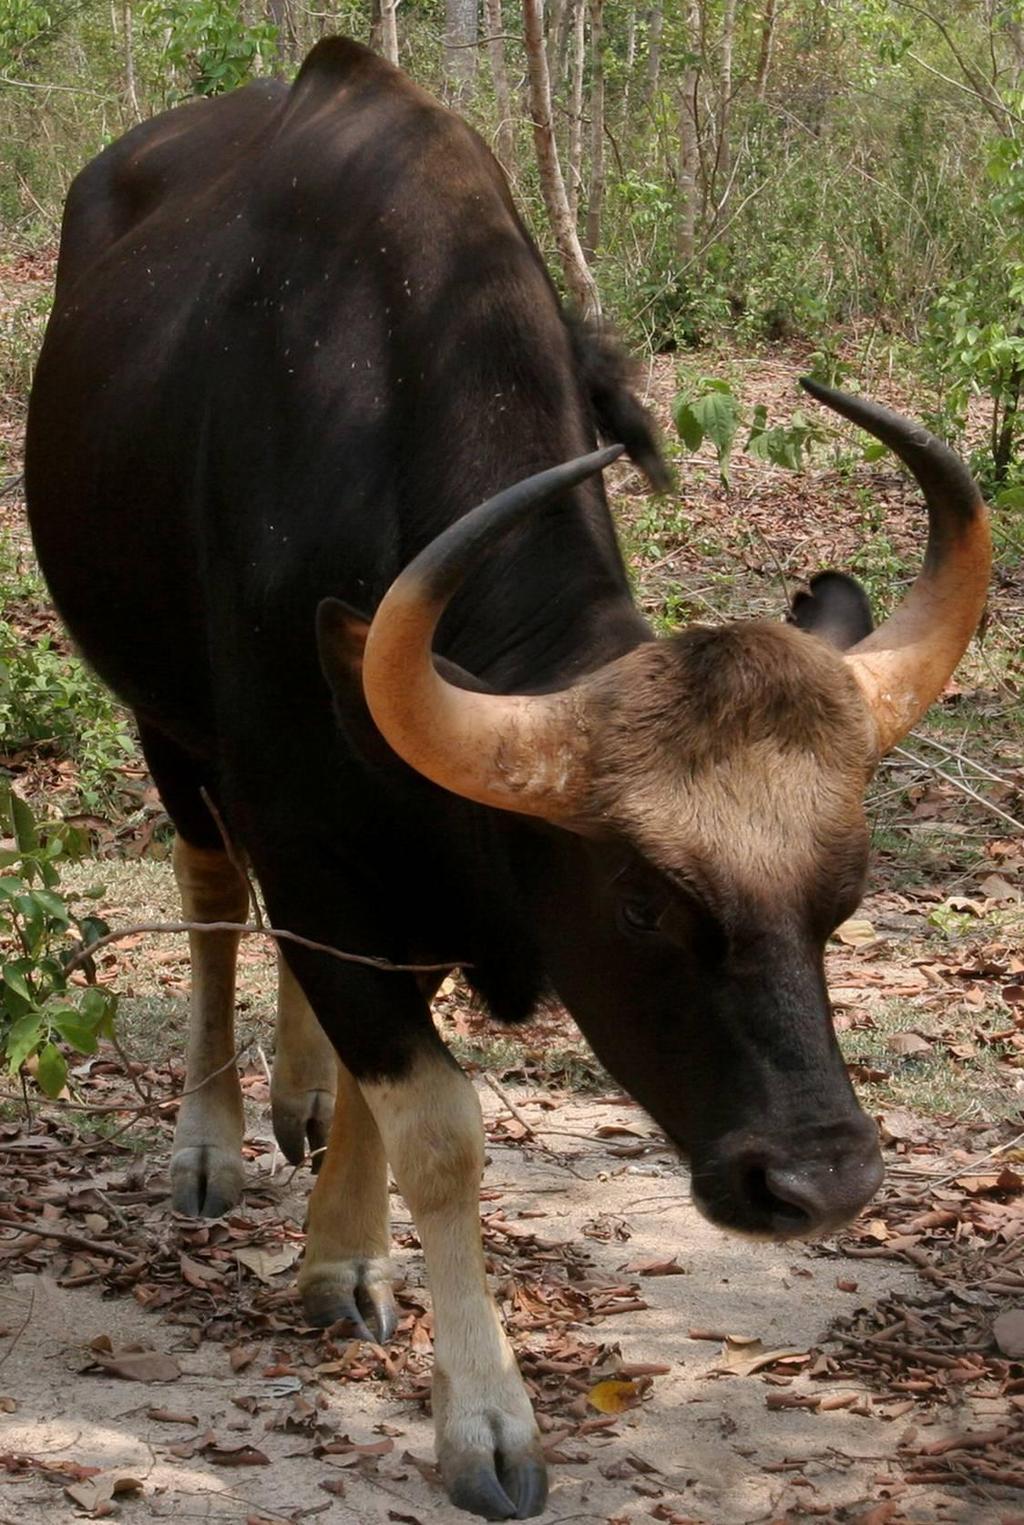 Wildlife zoom Gaur (Bos gaurus) The gaur is an extremely large mammal with a strong and muscular built body. Large males or bulls can weigh up to 1,500kg.